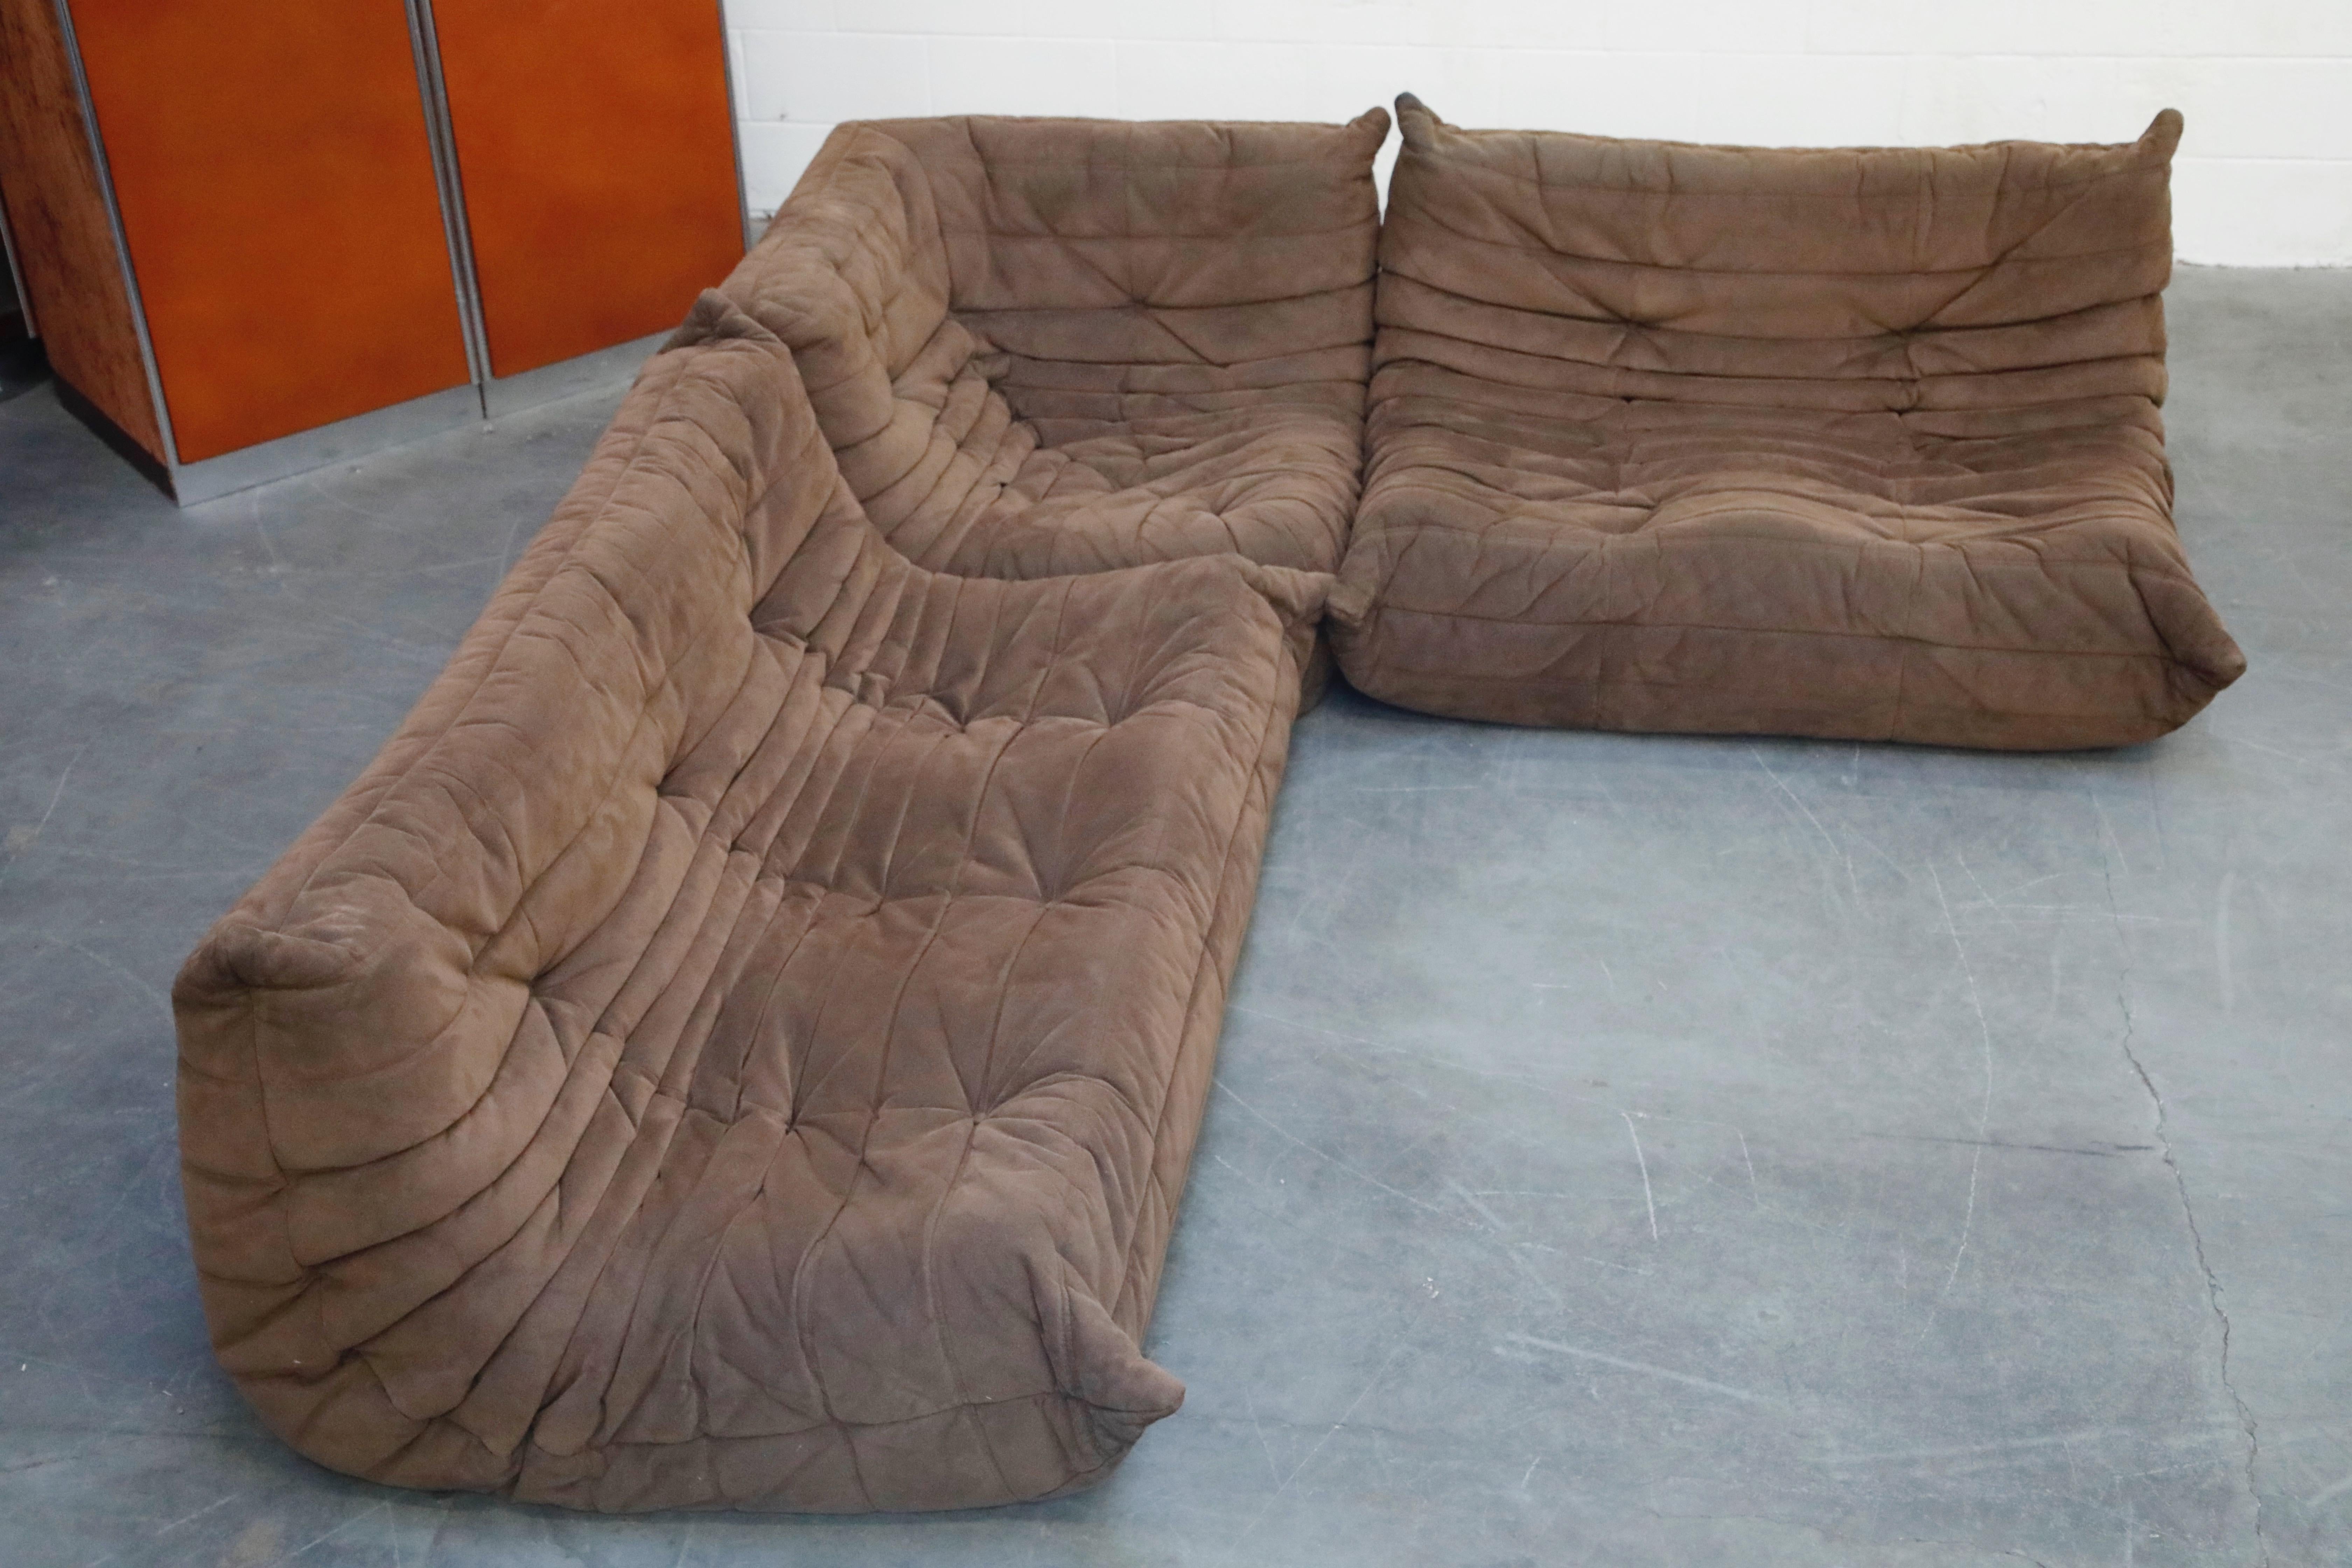 Late 20th Century 'Togo' Three-Piece Sectional Sofa Set by Michel Ducaroy for Ligne Roset, Signed